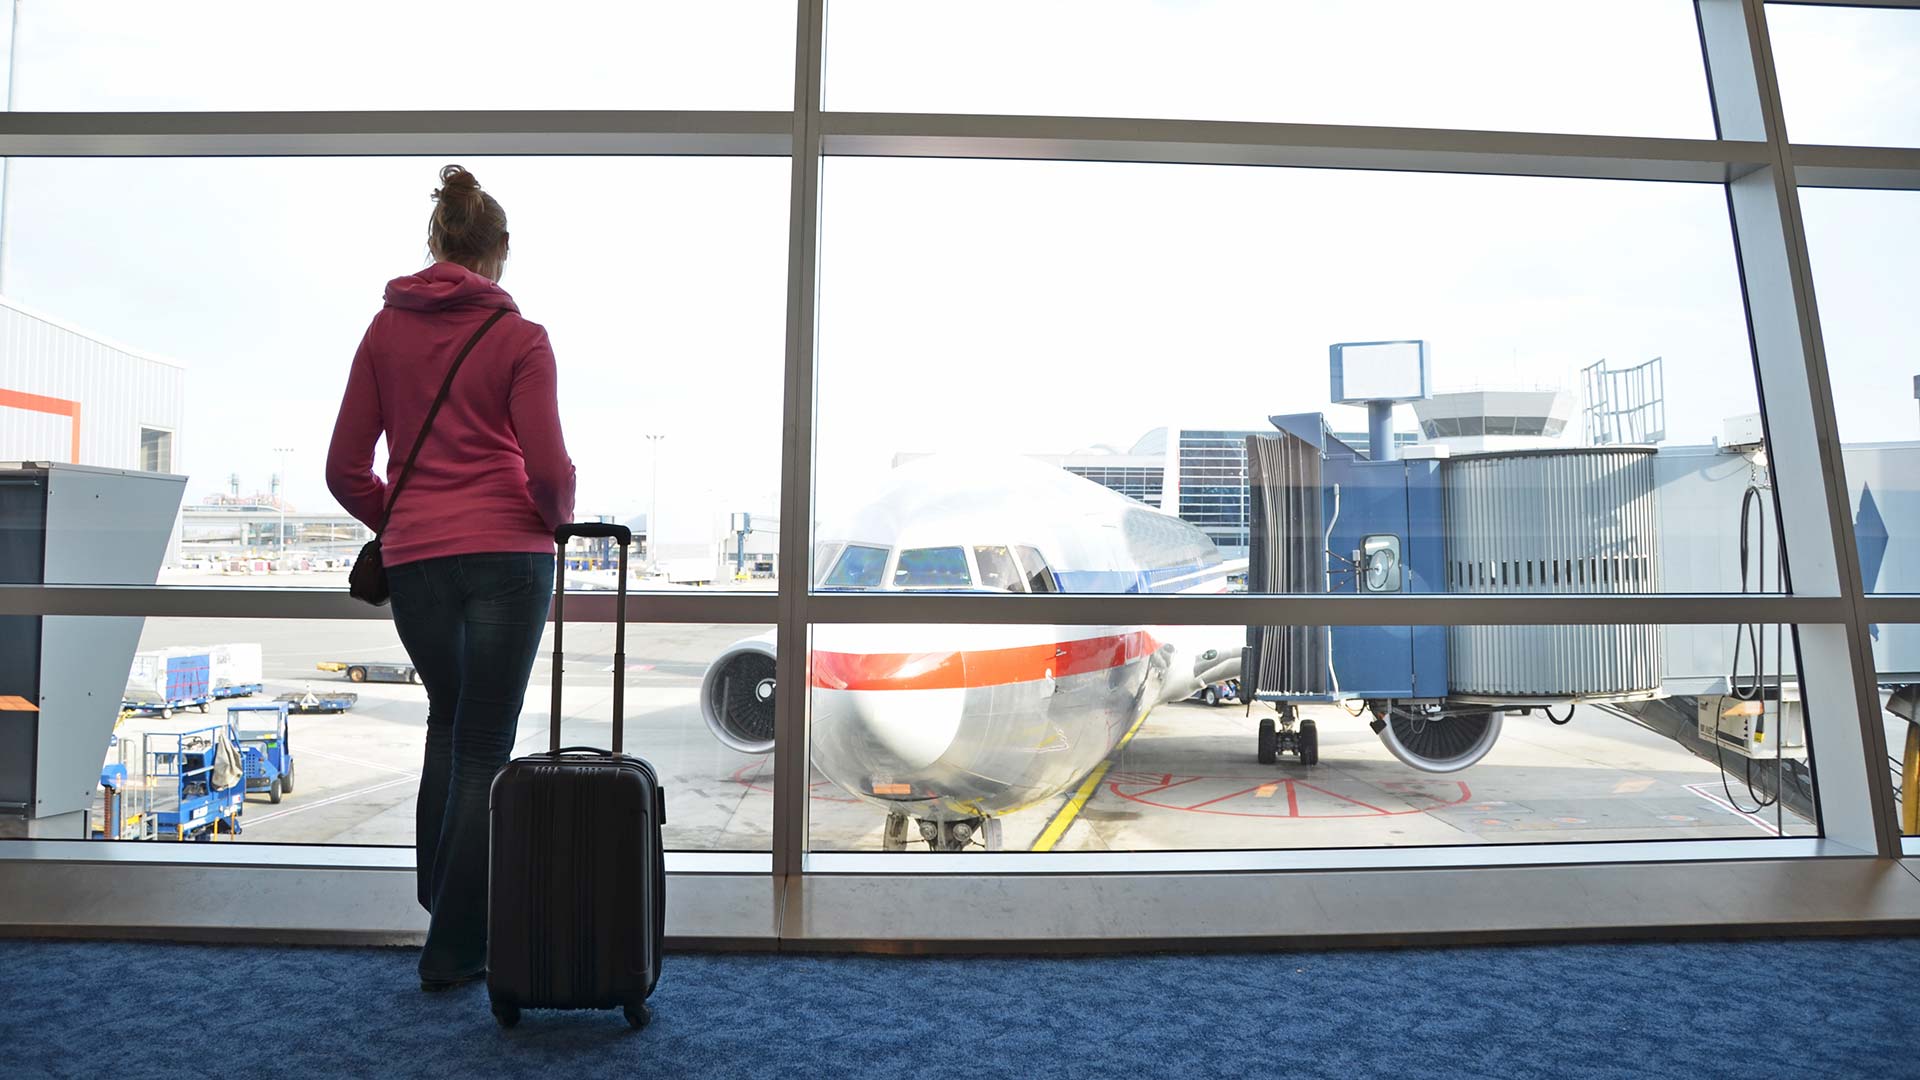 A person looking at an airplane set to unload passengers.